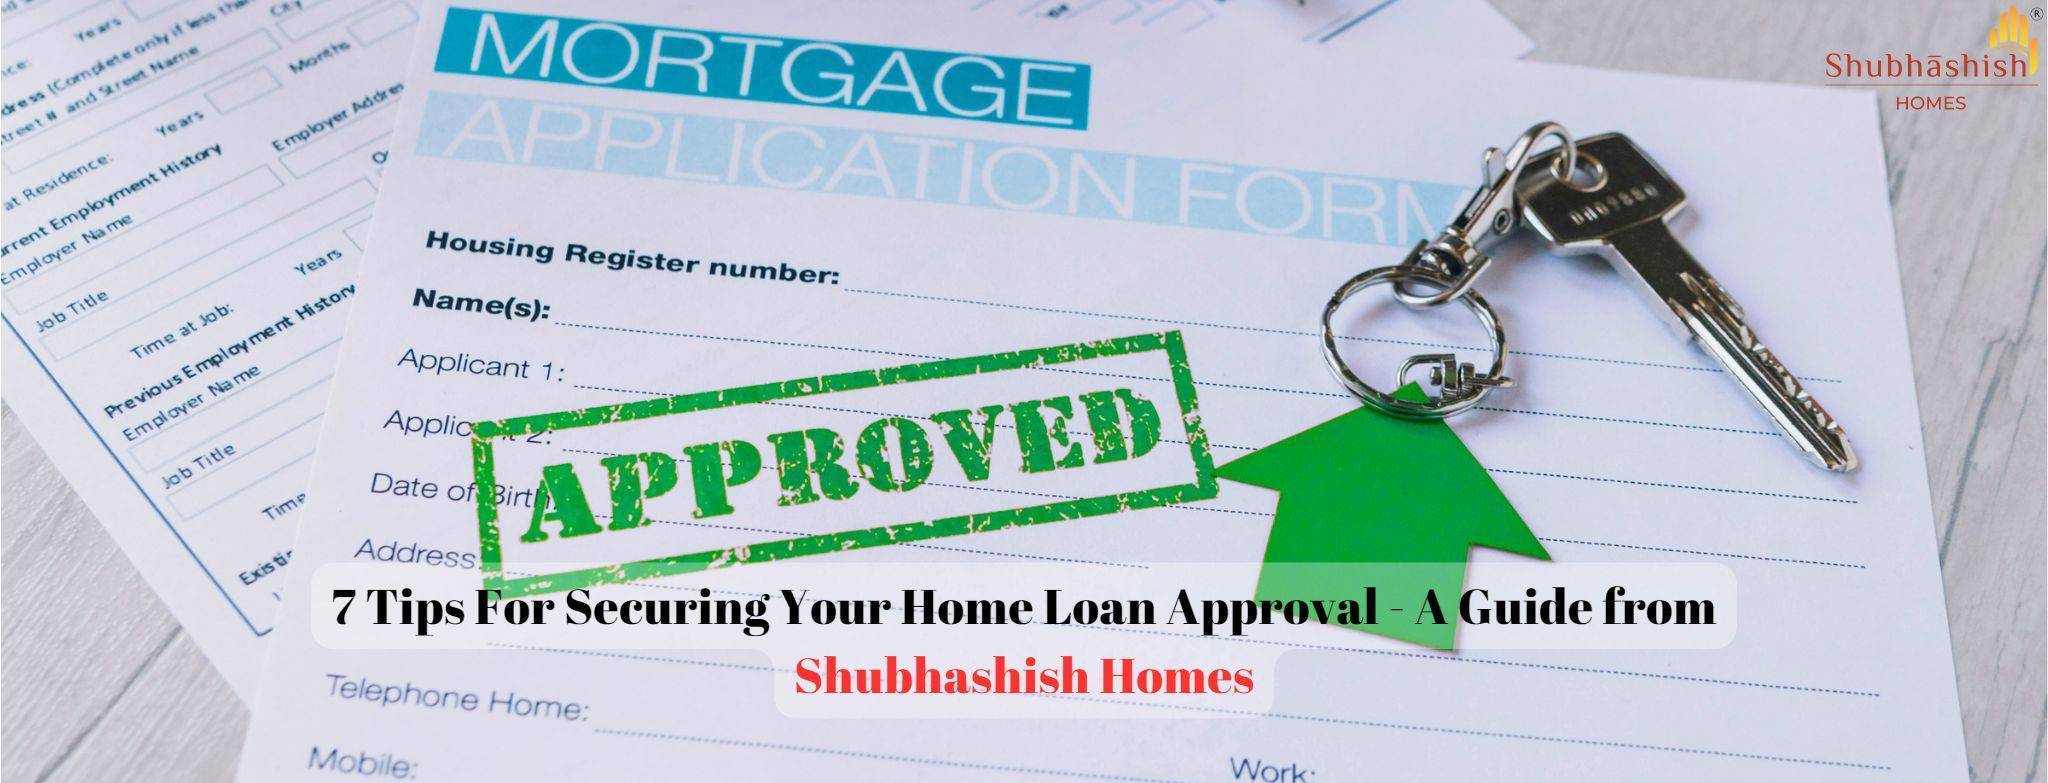 7 Tips For Securing Your Home Loan Approval ?A Guide from Shubhashish Homes